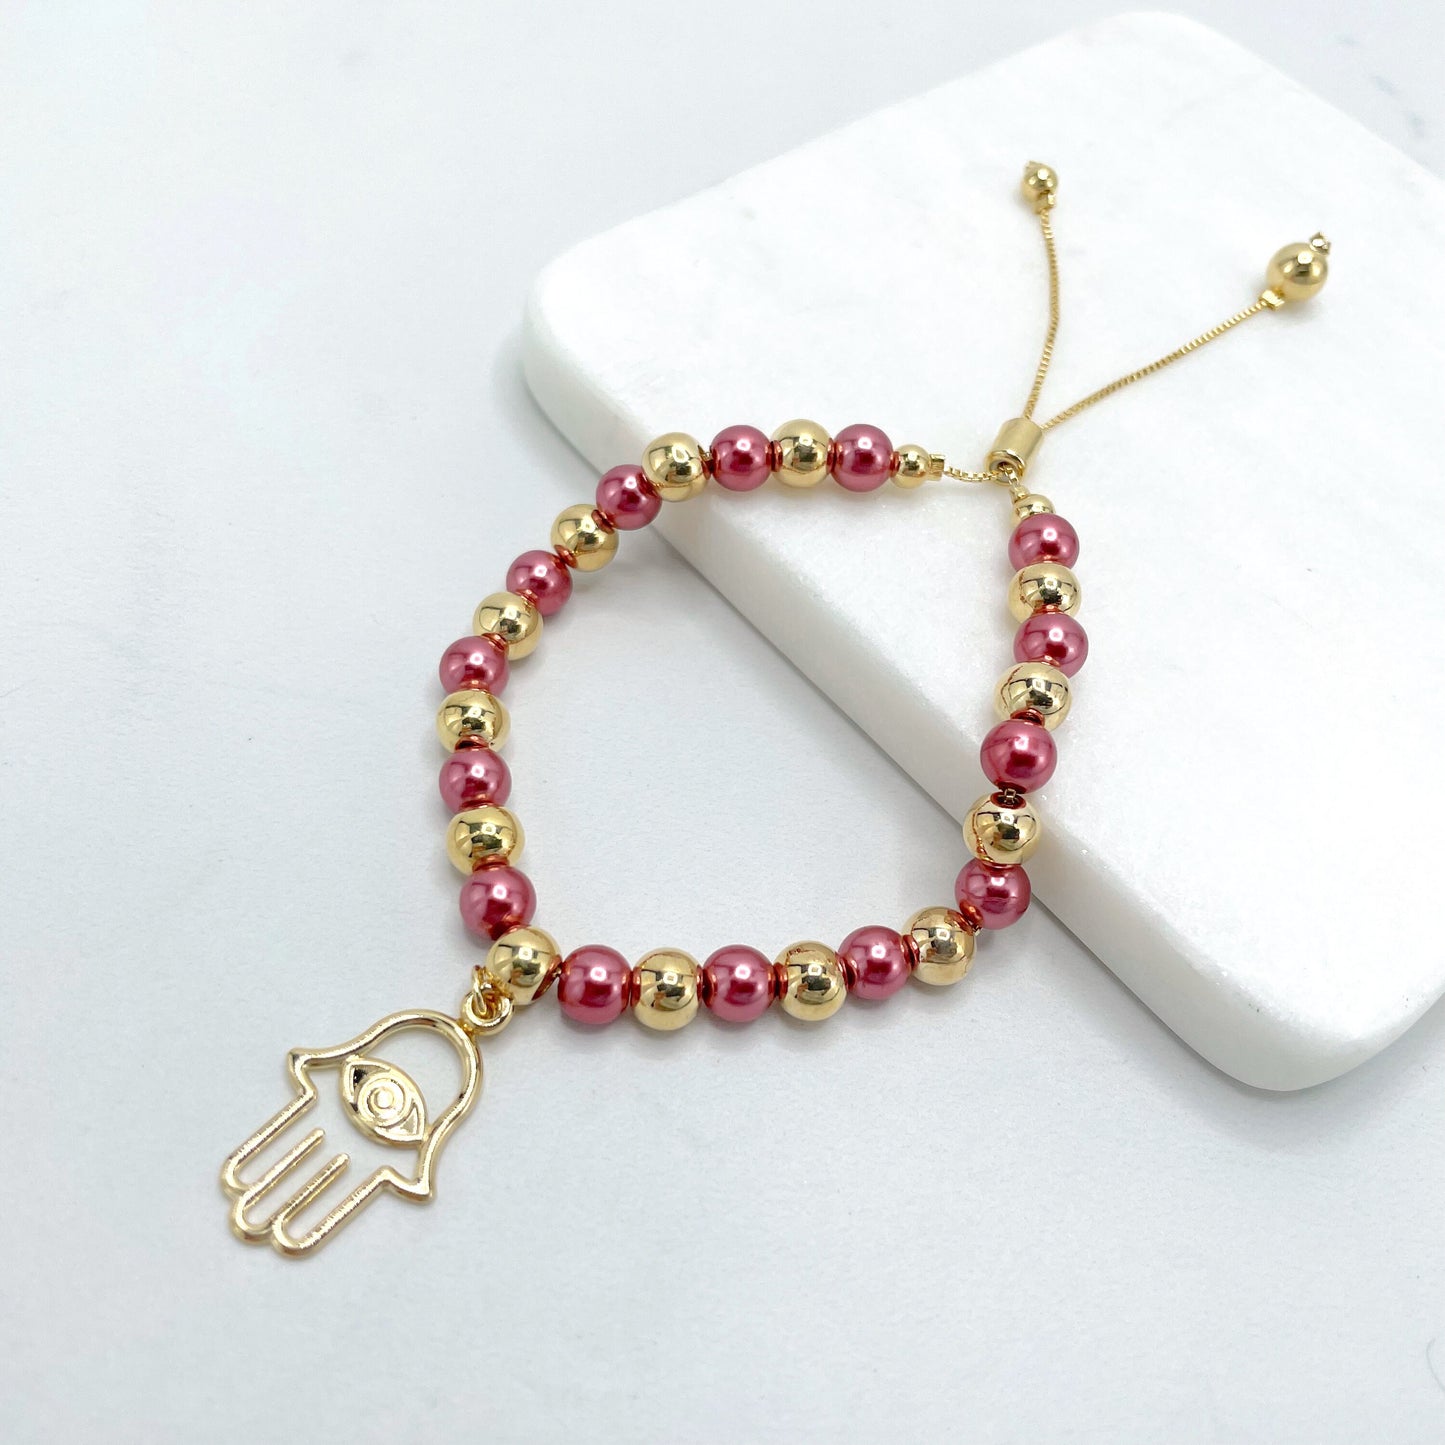 18k Gold Filled 1mm Box Chain with Pink & Gold Beads, Gold Hamsa Hand Charm, Adjustable Beaded Bracelet, Wholesale Jewelry Making Supplies